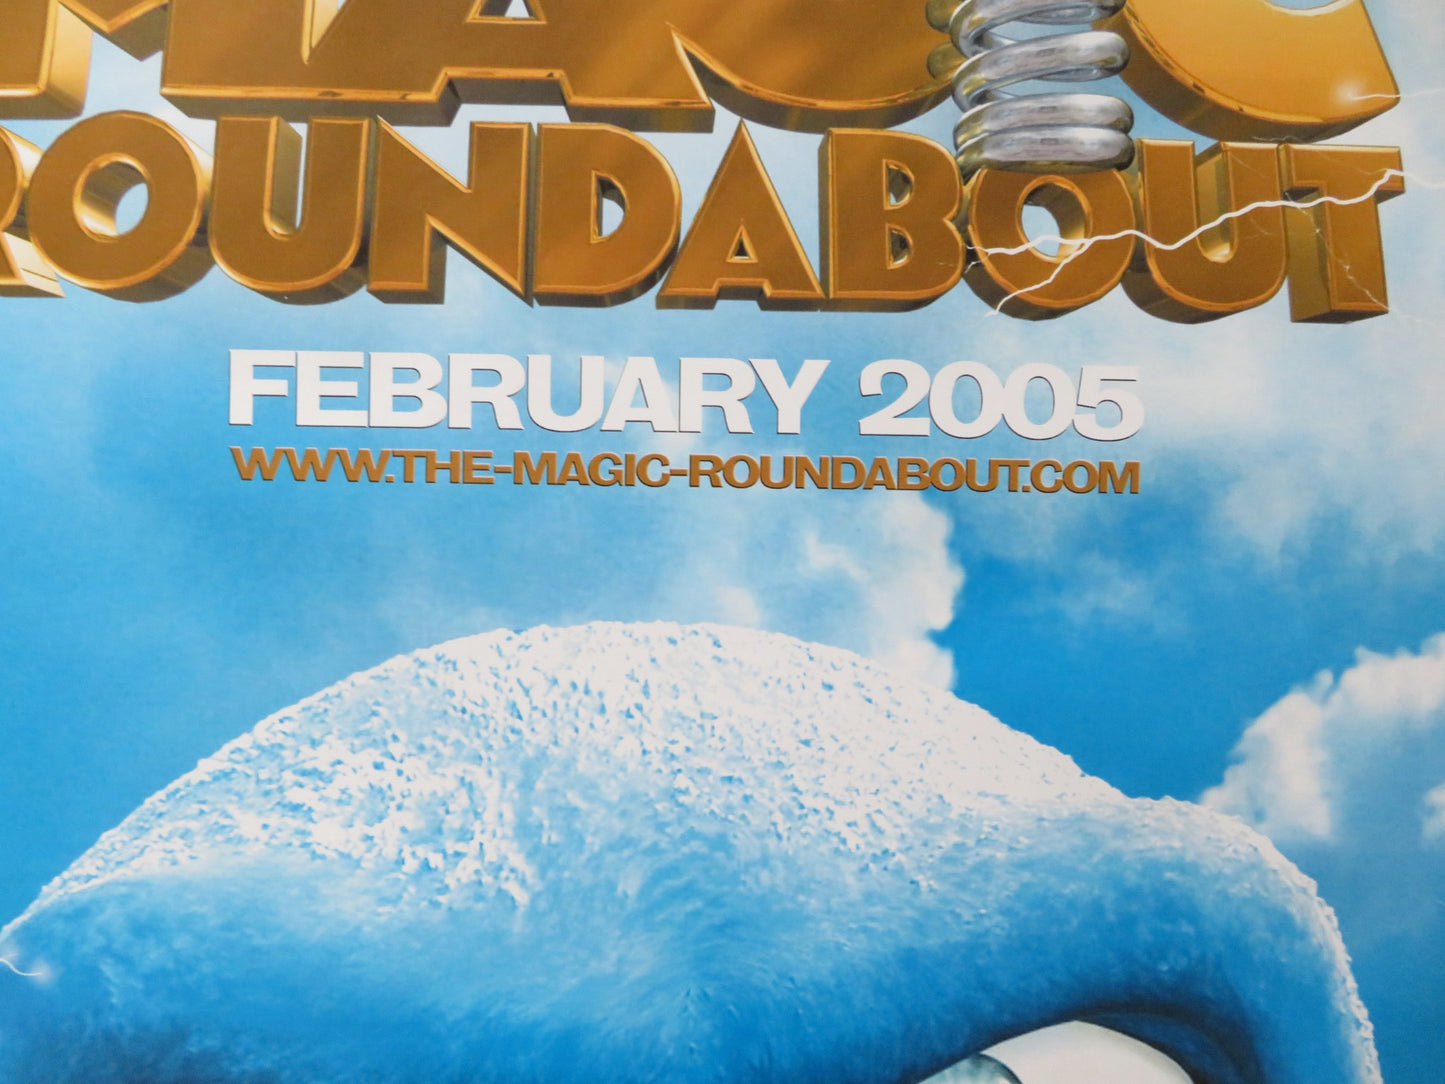 THE MAGIC ROUNDABOUT: THE MOVIE UK QUAD (30"x 40") ROLLED POSTER TOM BAKER 2005